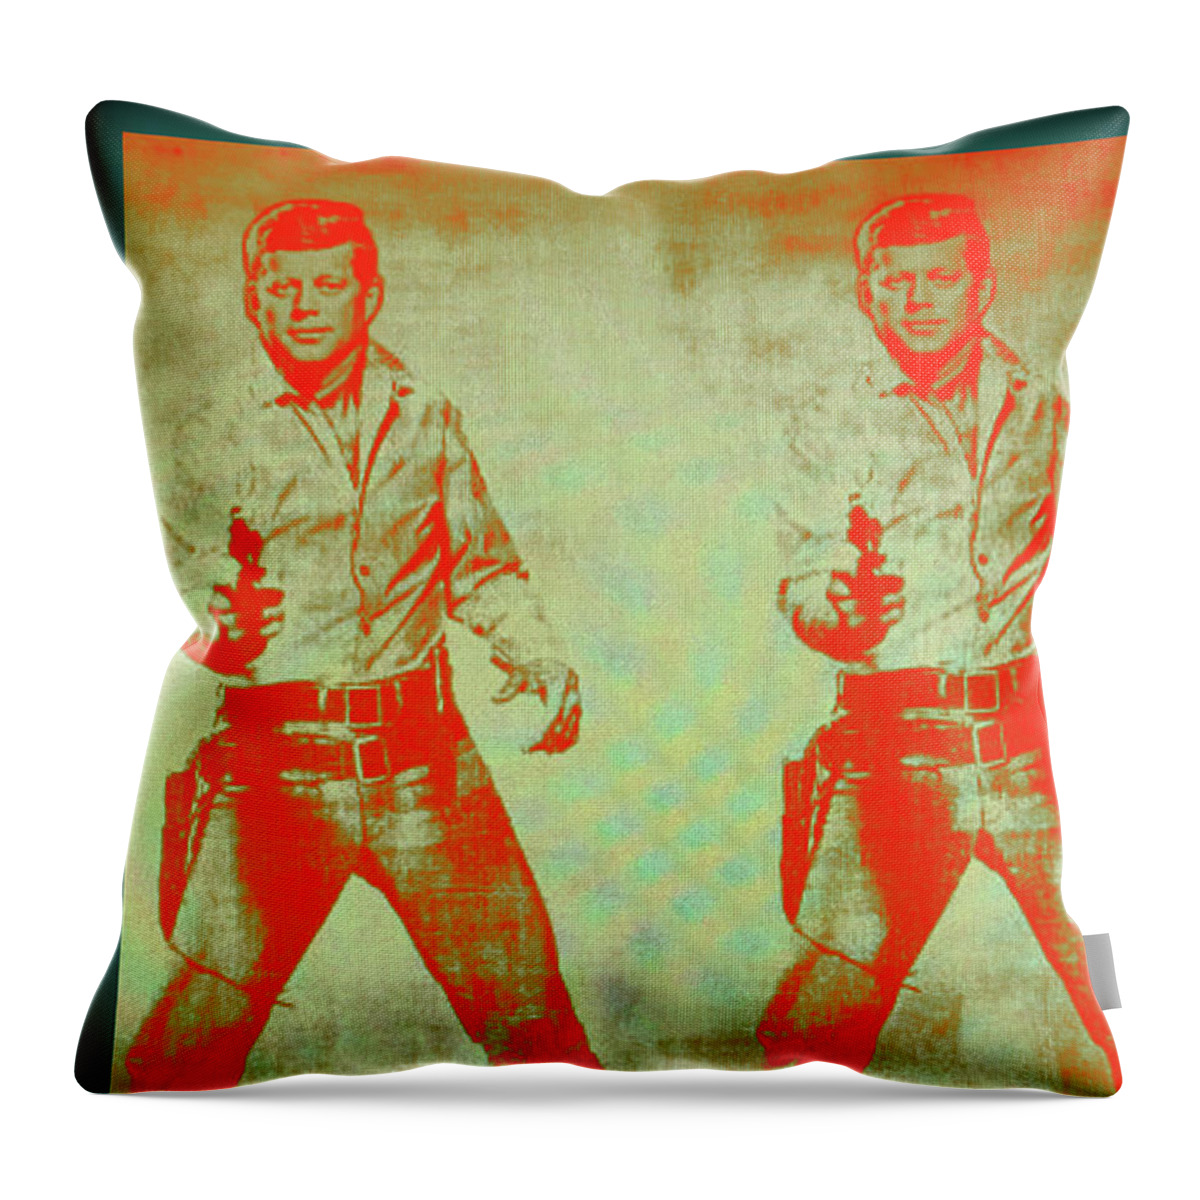 Wunderle Throw Pillow featuring the digital art John F. Kennedy Simulation by Wunderle